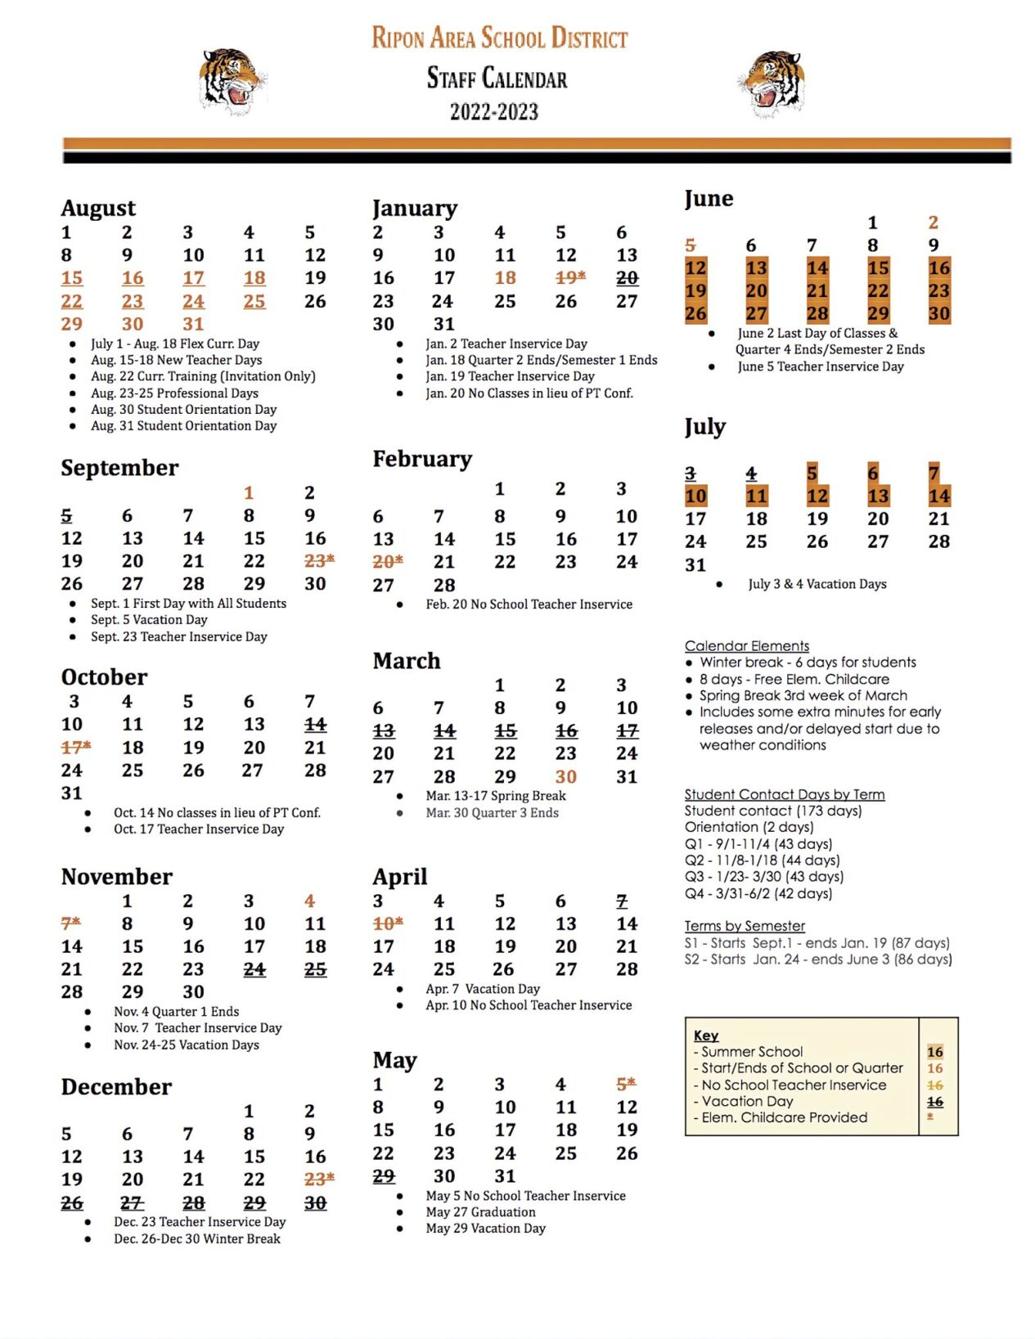 202223 Ripon Area School District calendar replaces early releases